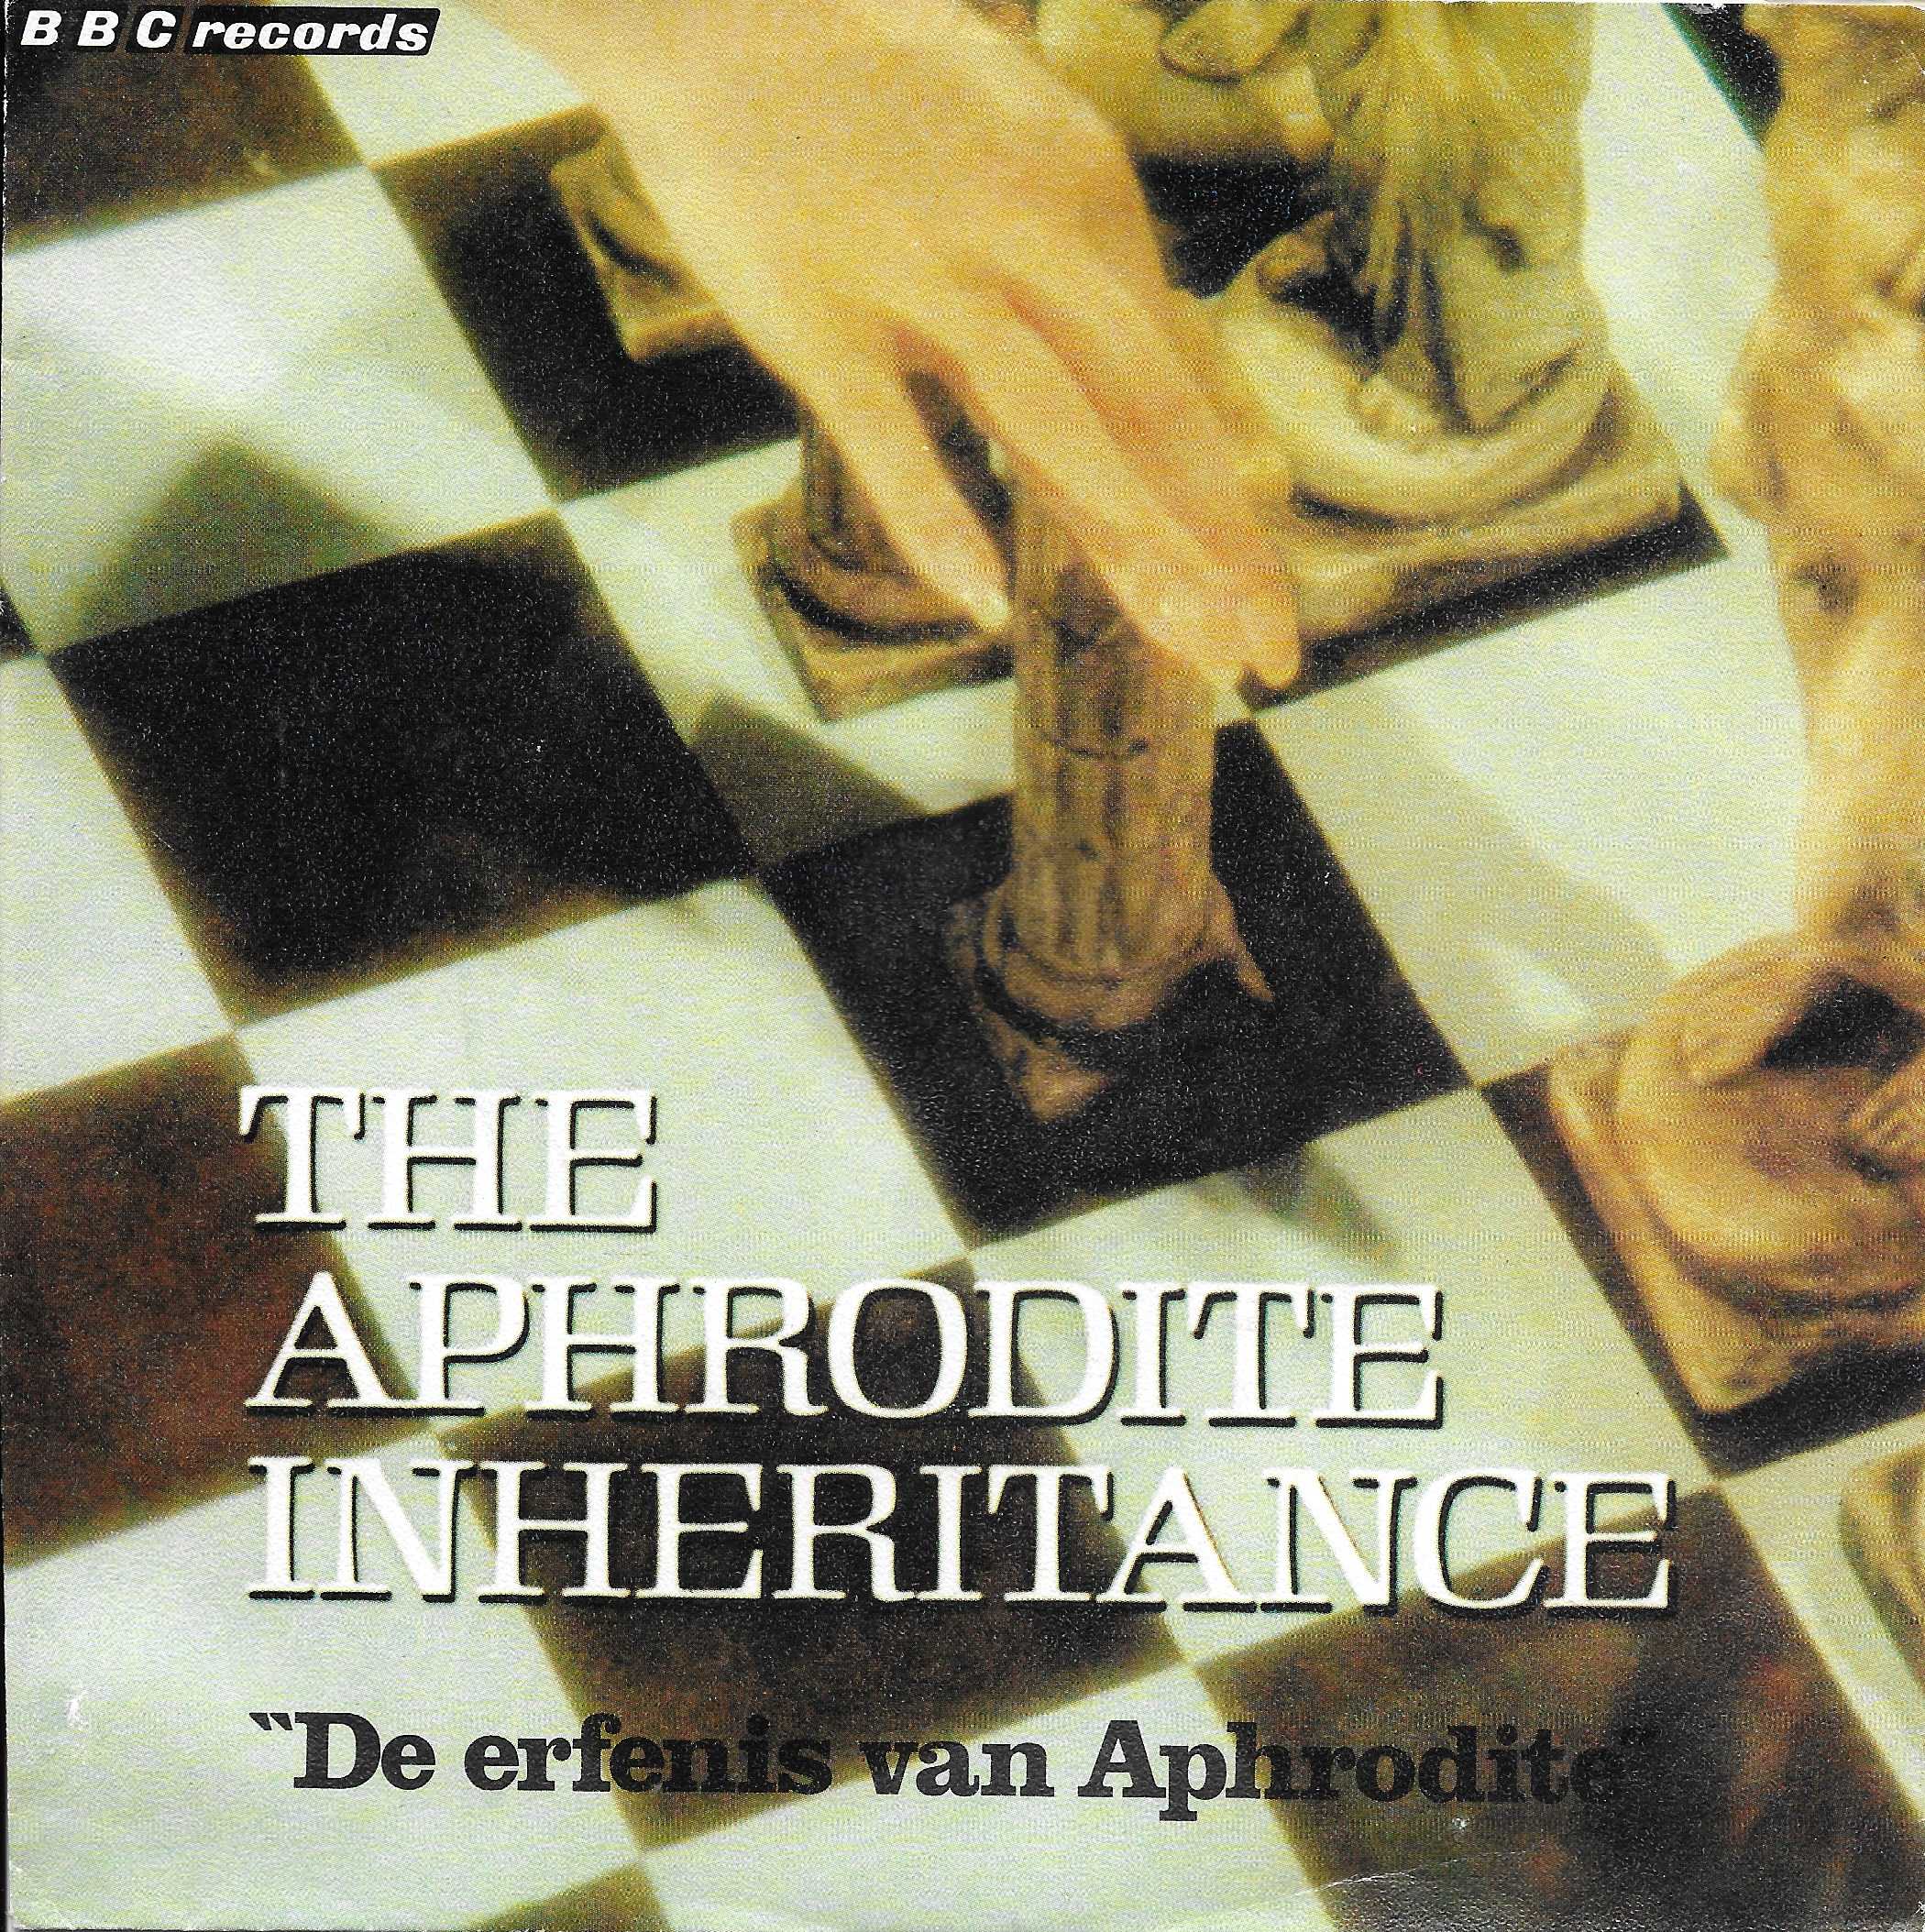 Picture of RESL 62-iD The Aphrodite inheritance by artist George Kotsonis from the BBC singles - Records and Tapes library